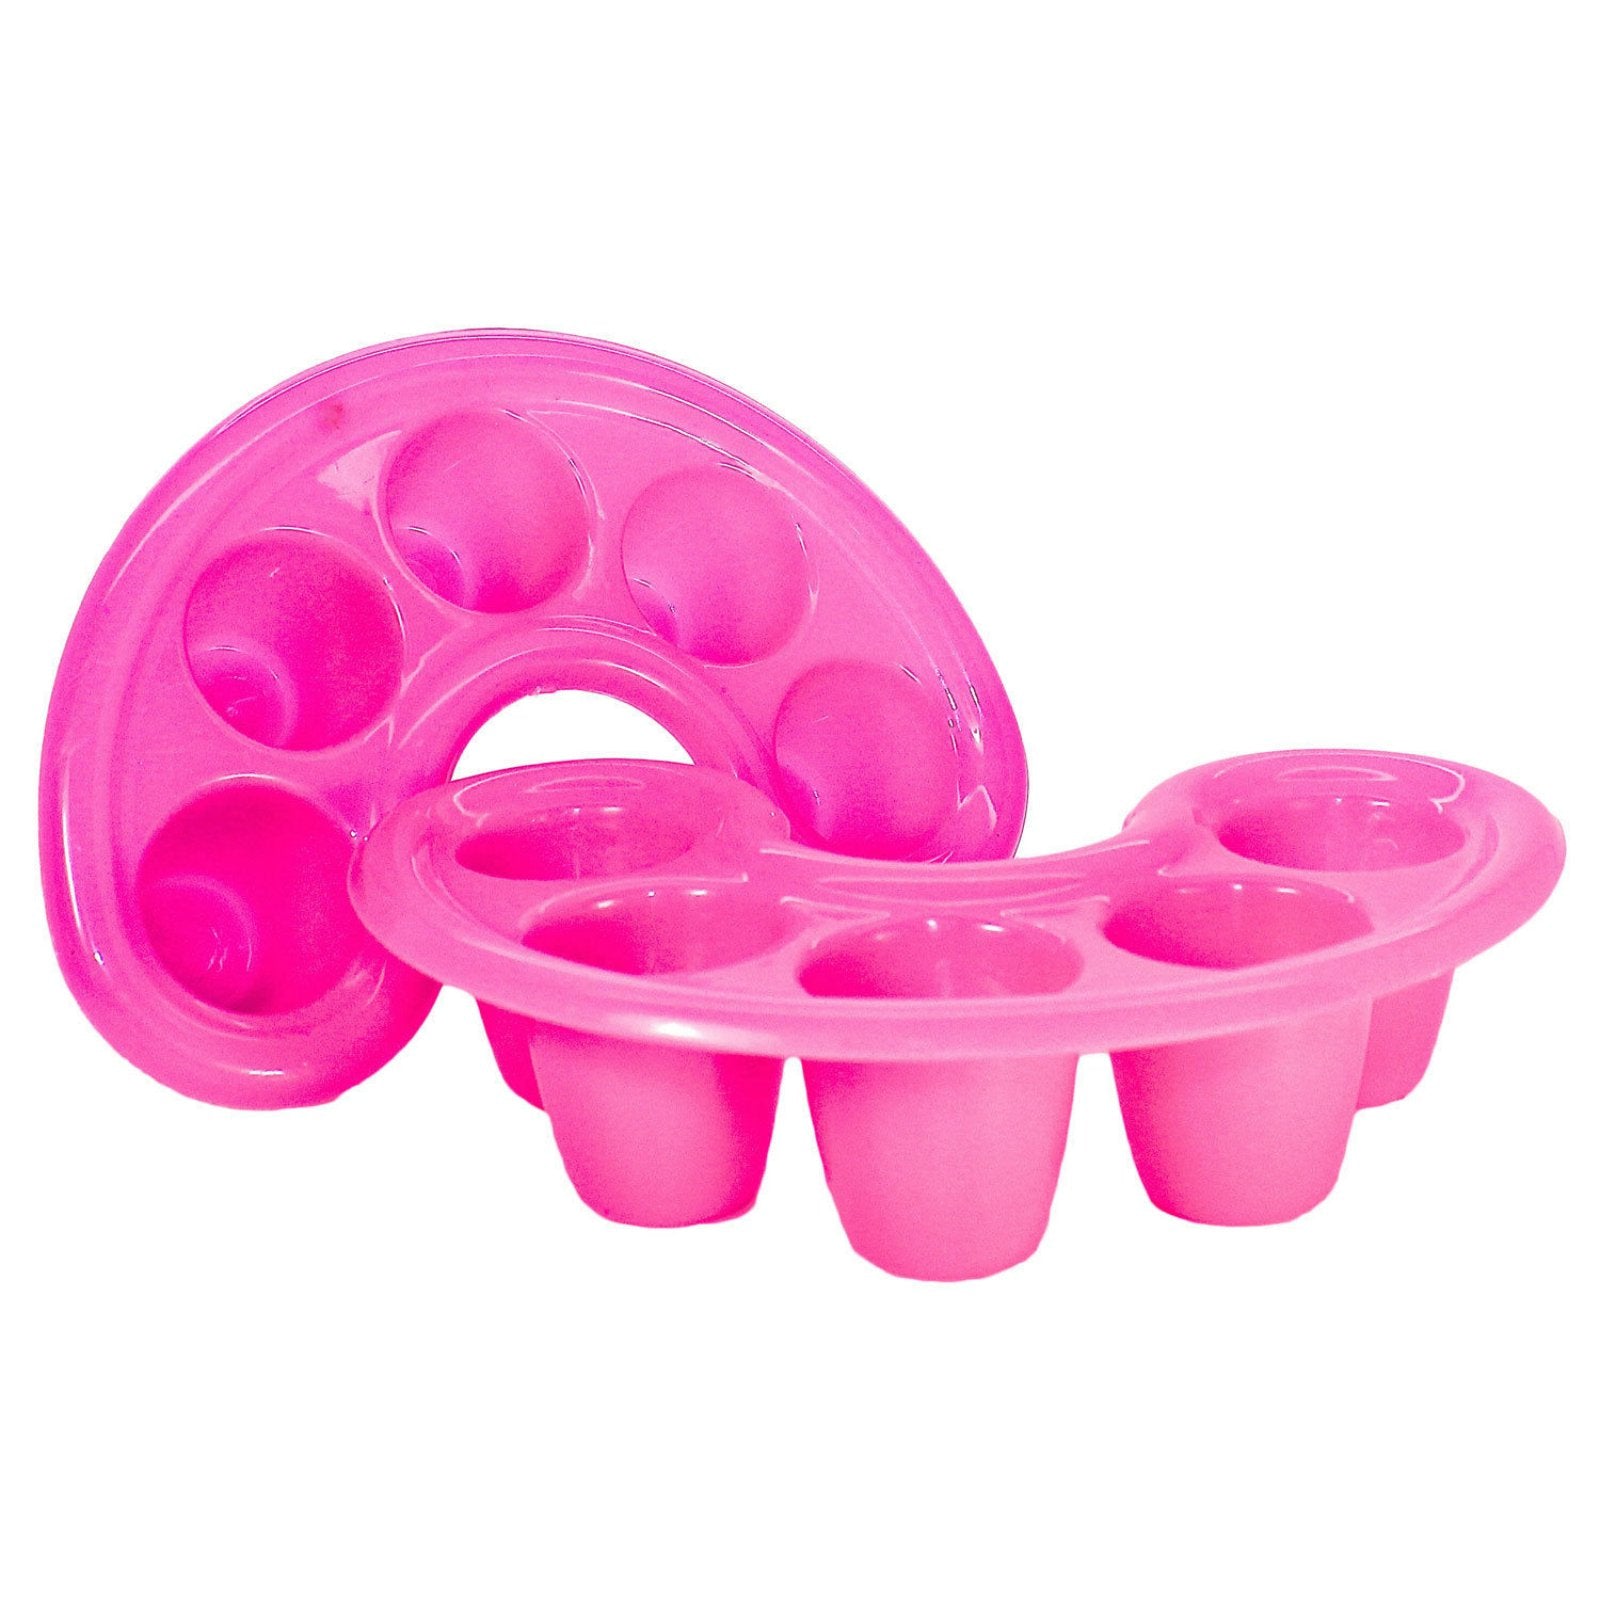 Finger bowls for soaking off gel nail polish from NYK1